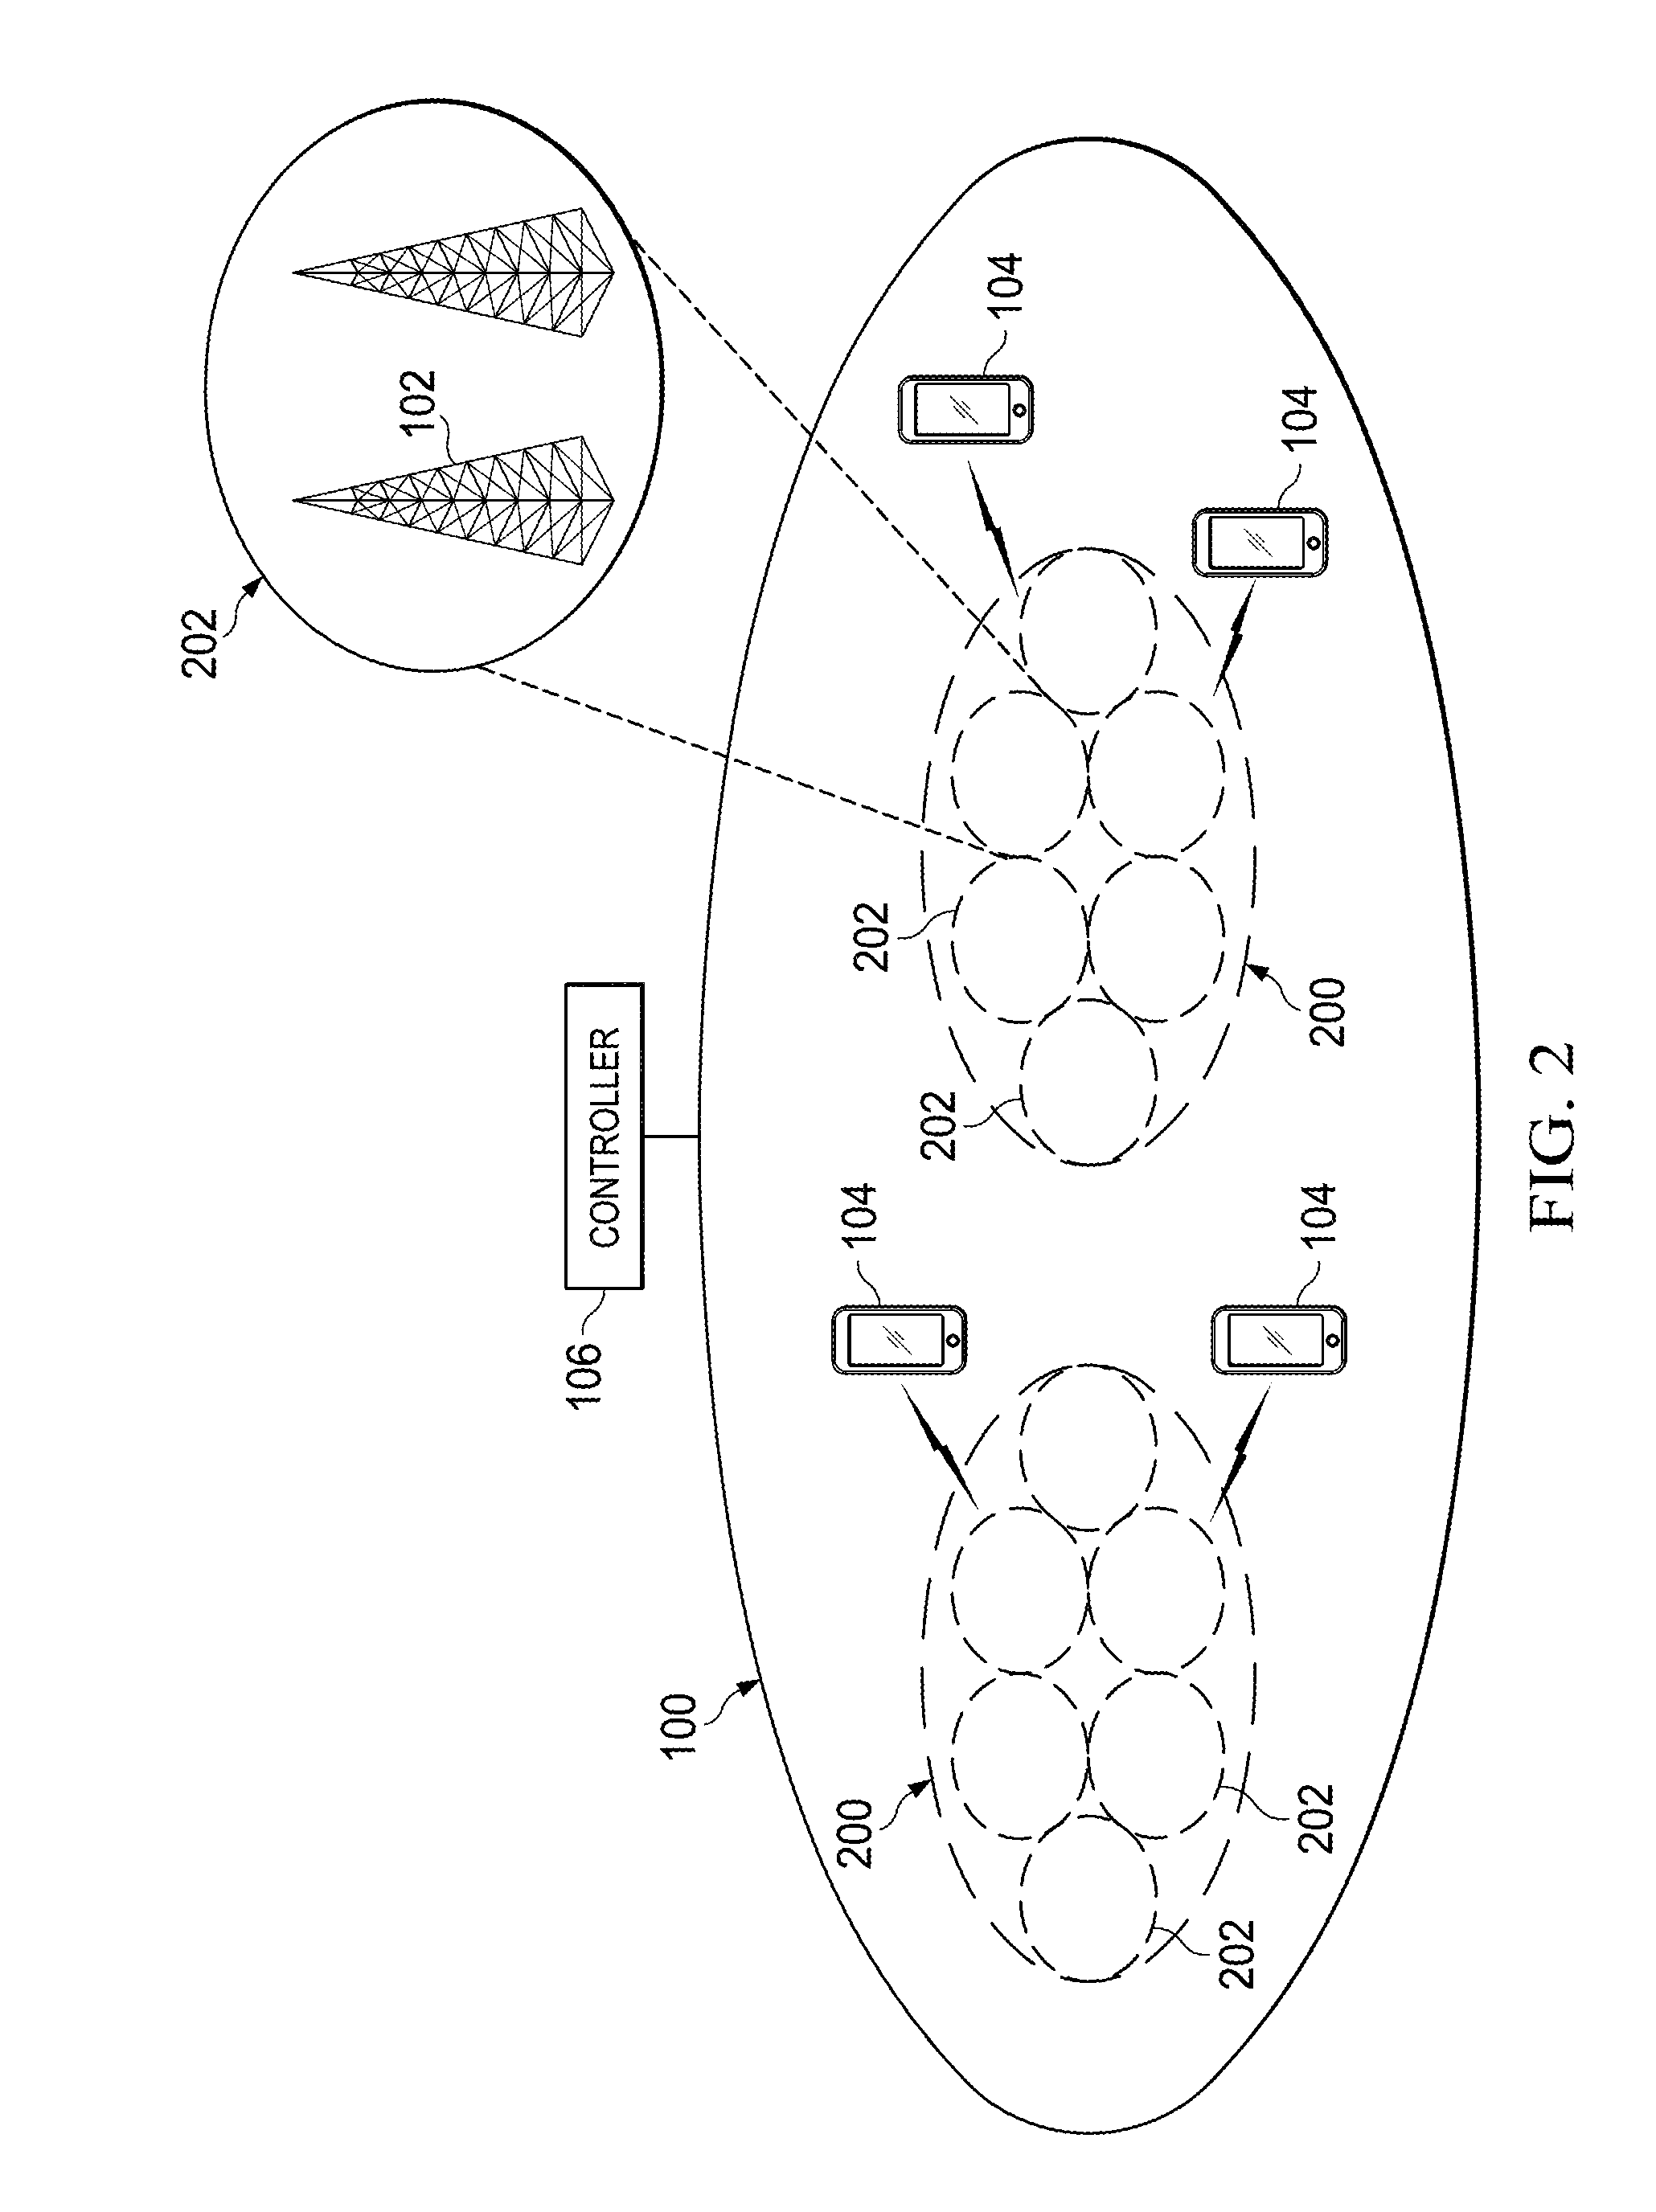 System and Method for Radio Access Virtualization